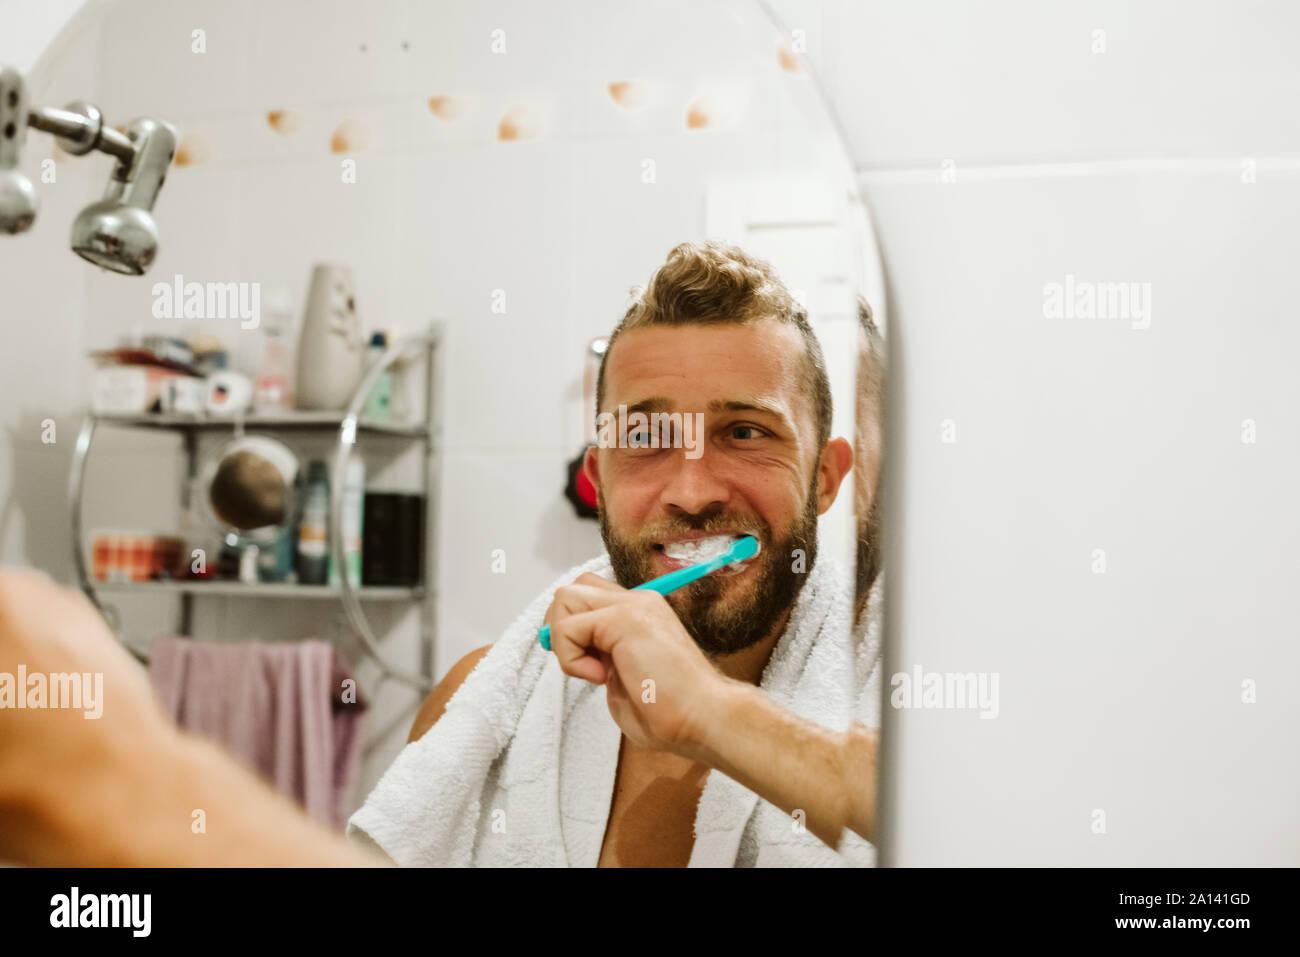 Man with toothbrush cleaning teeth at bathroom Stock Photo